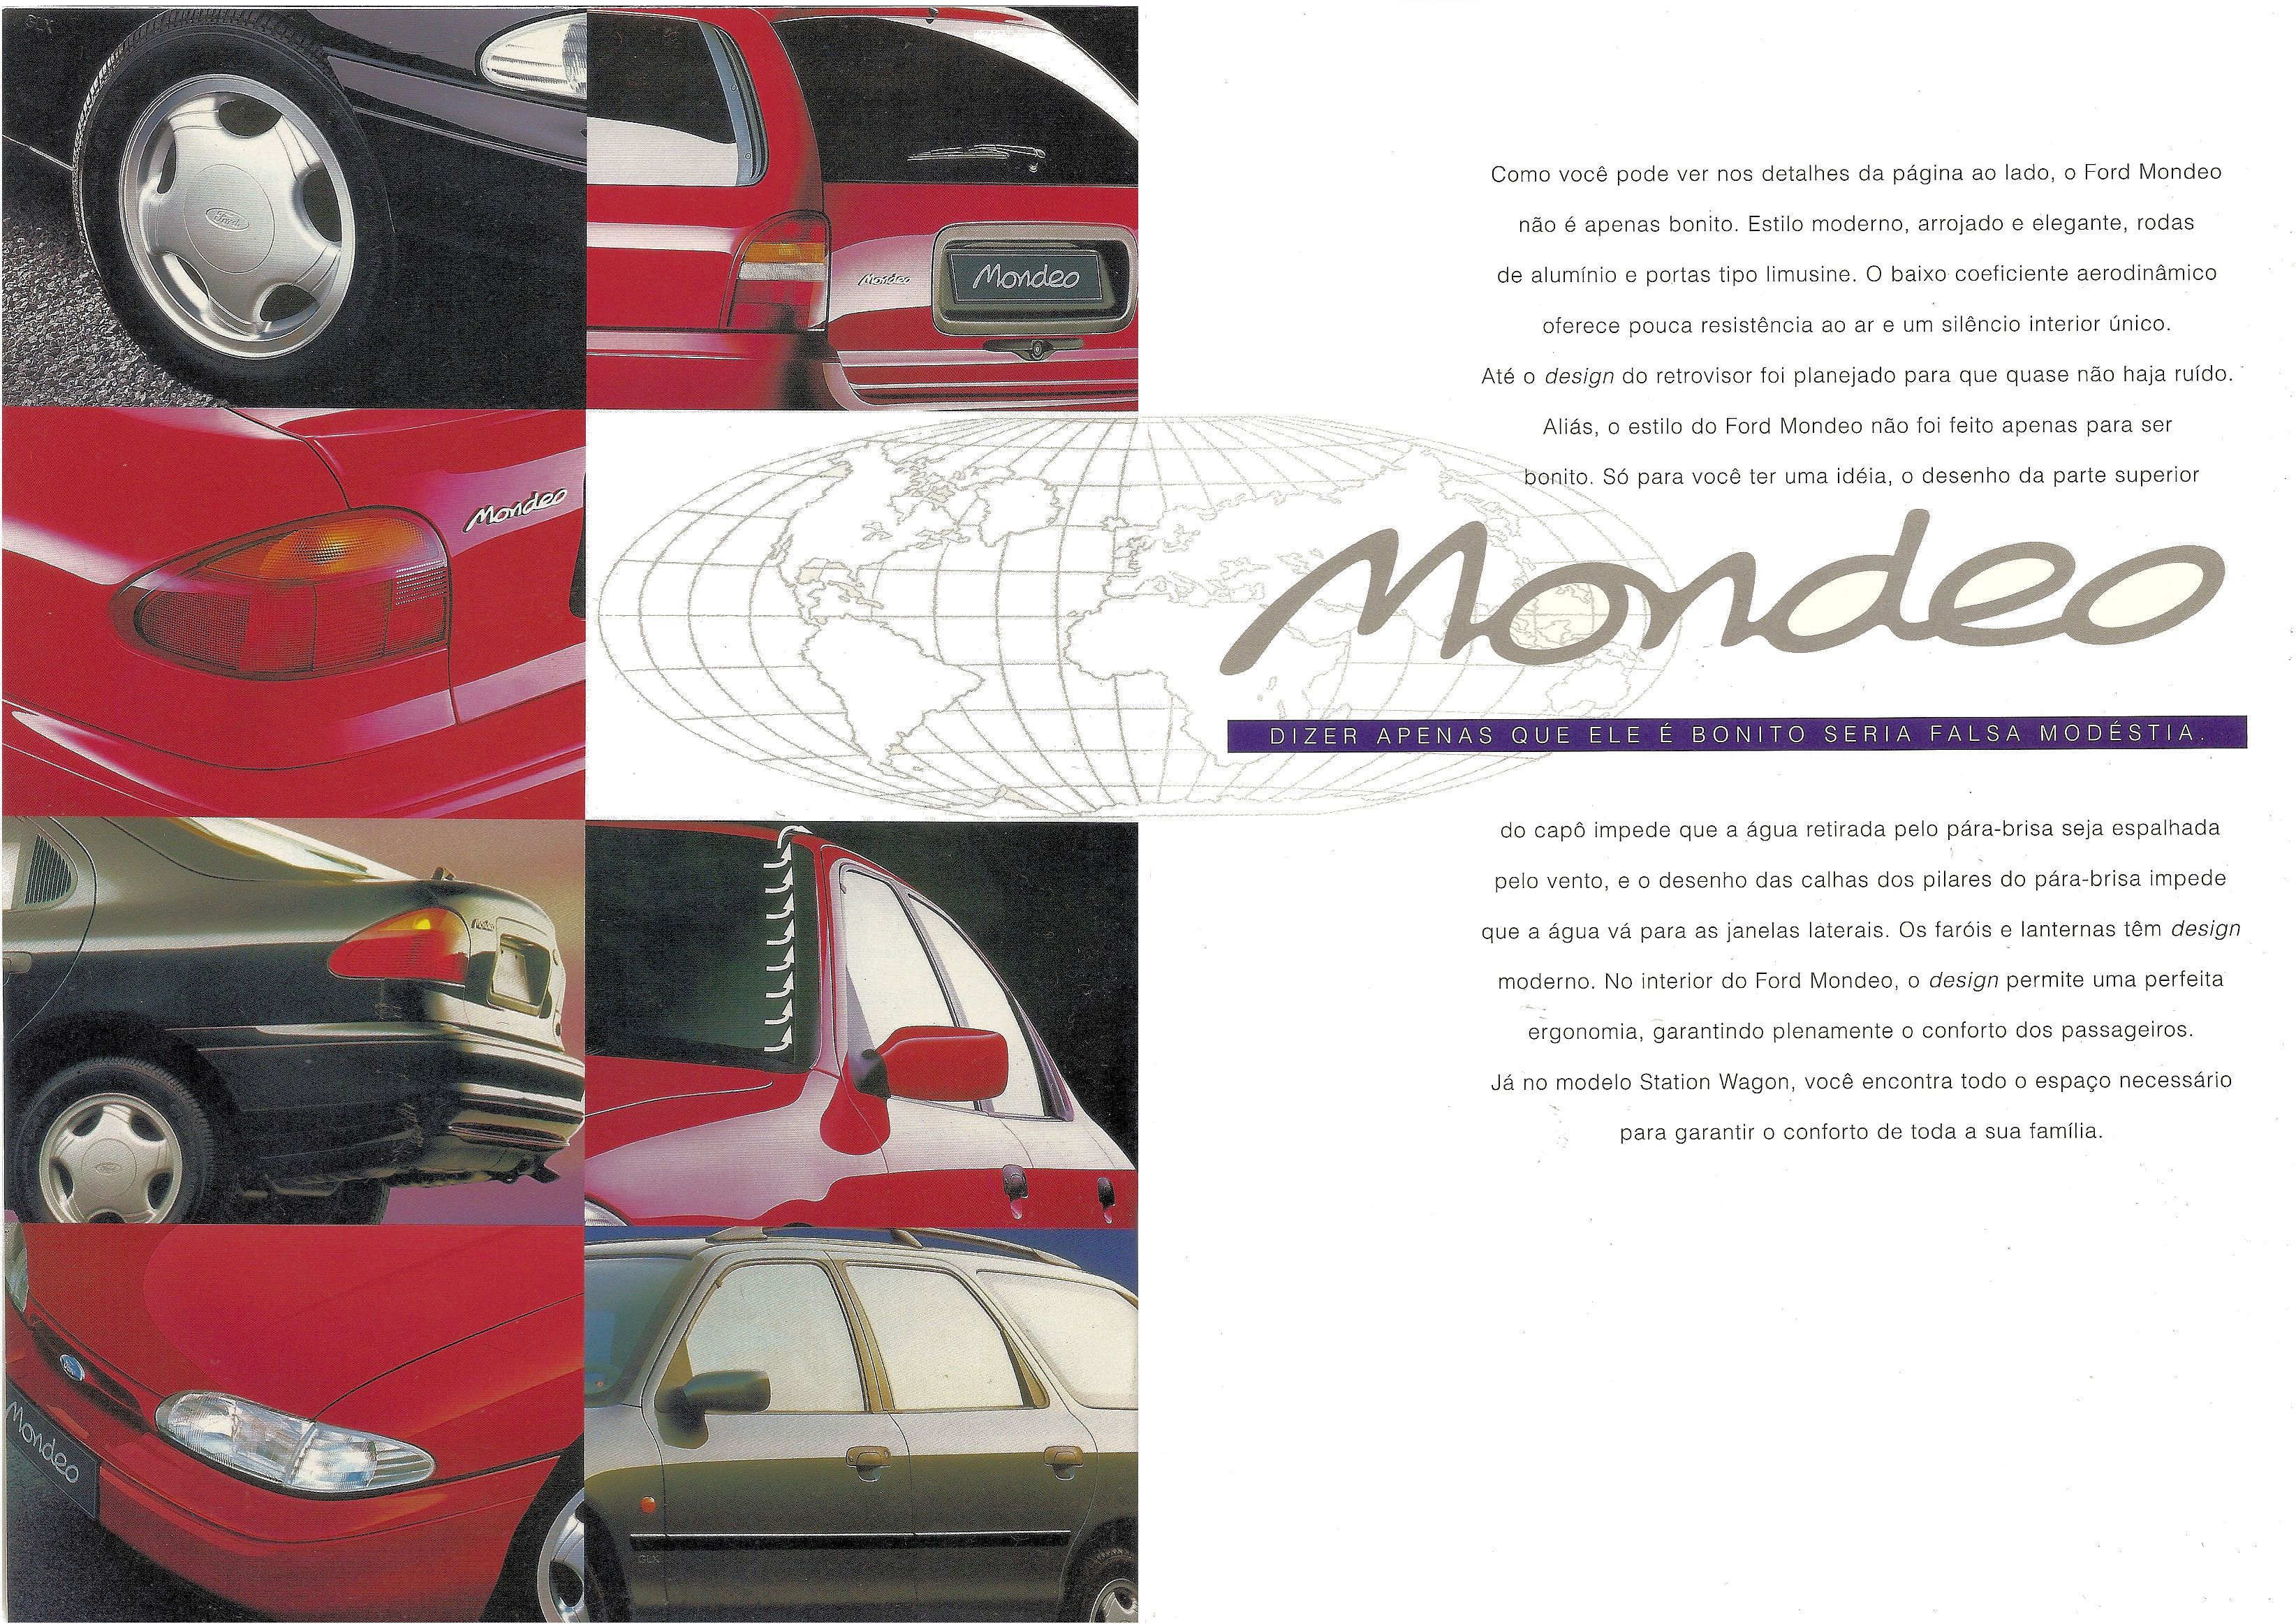 1996 Ford Mondeo Brochure